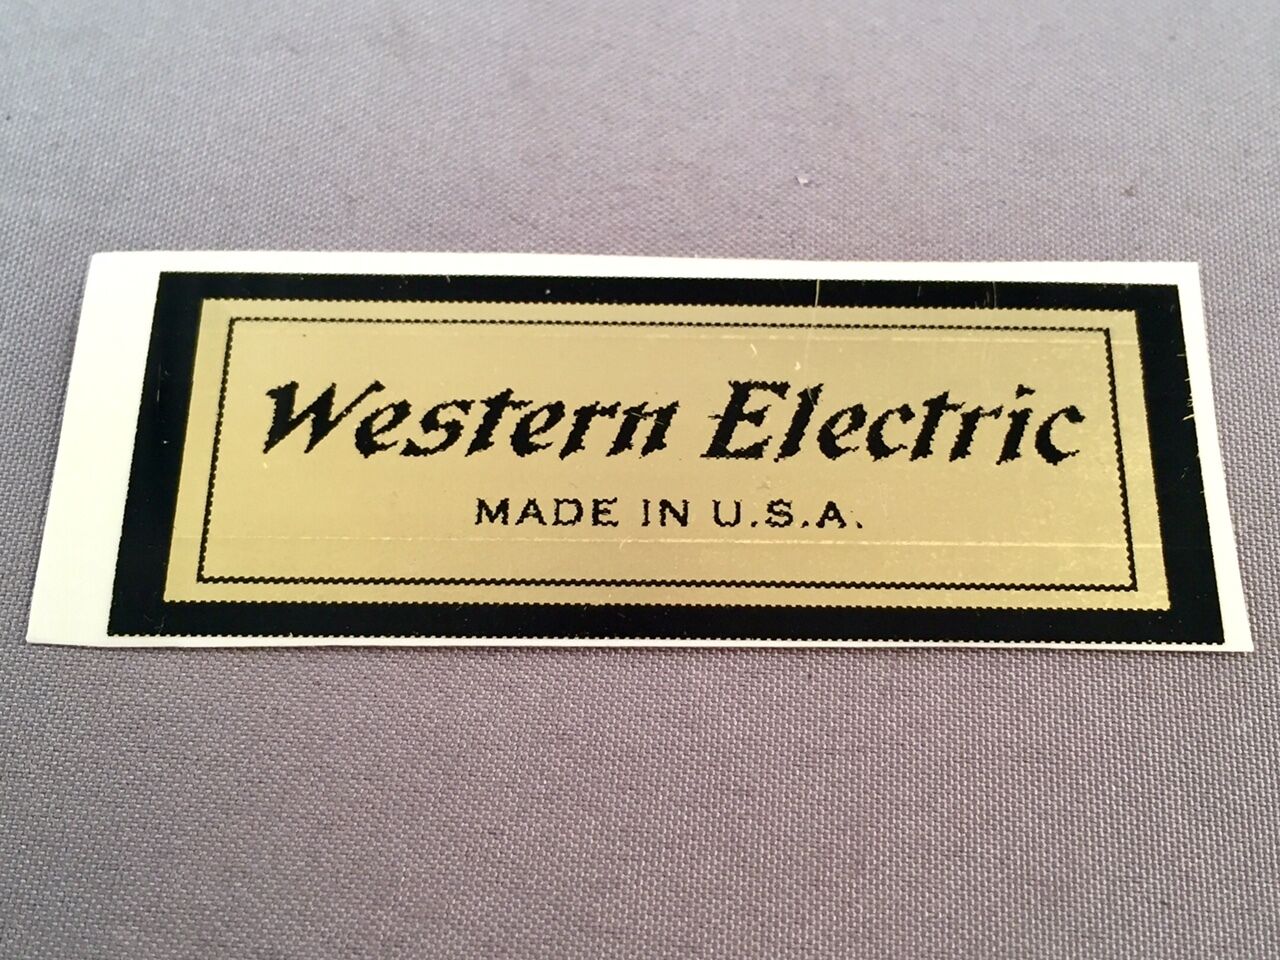 Antique Vintage Telephone Water Decal - Western Electric - 201141